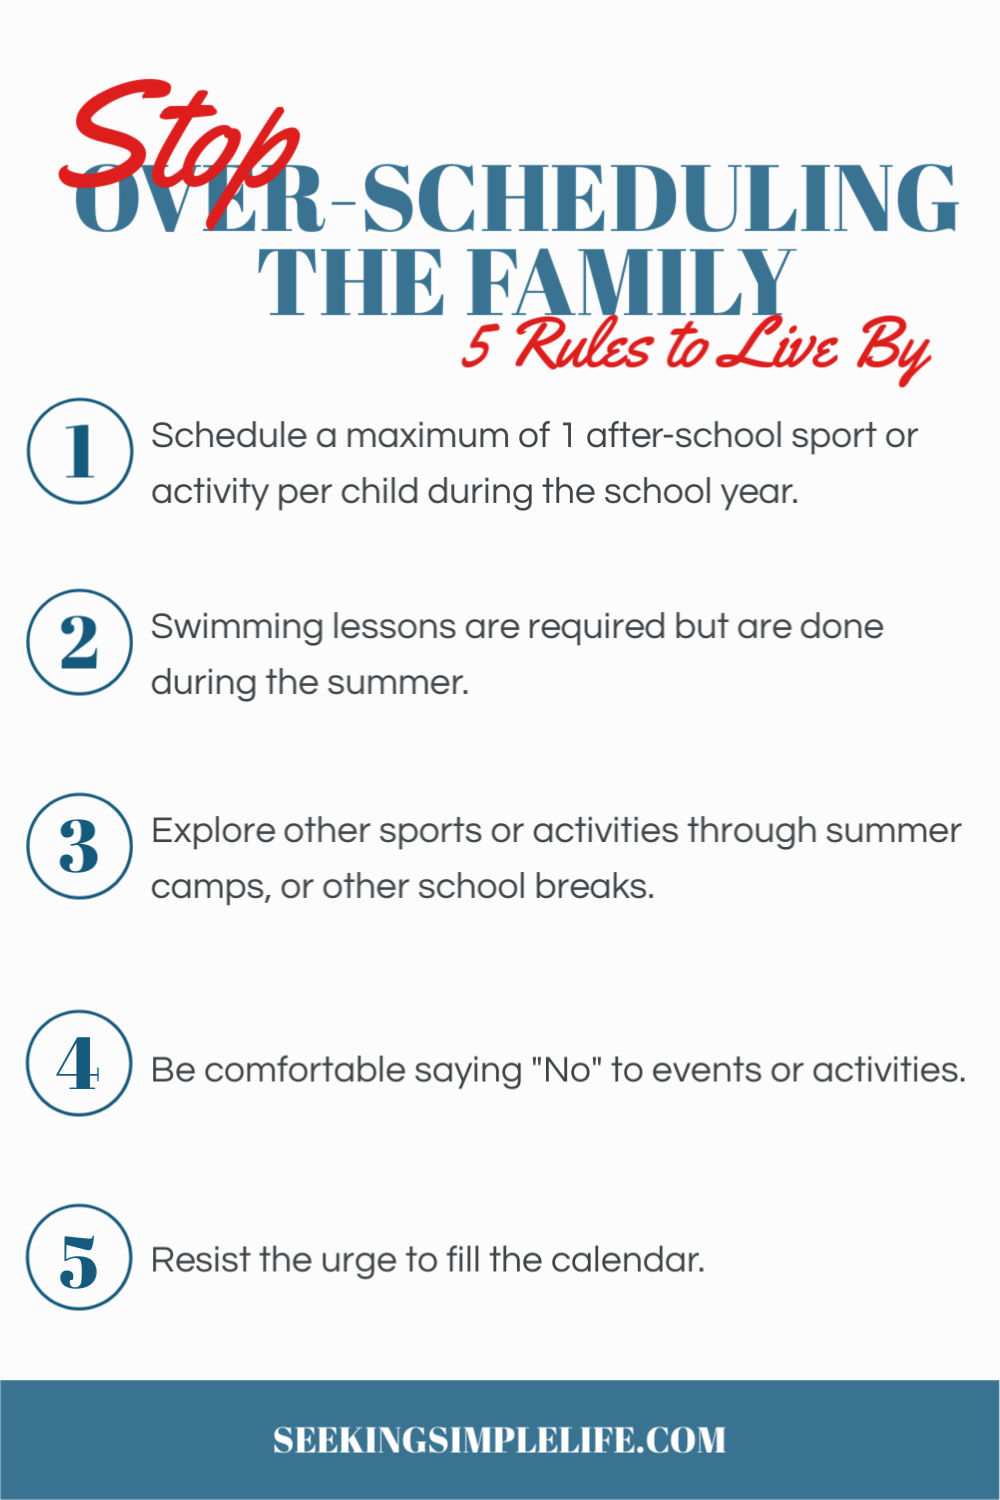 Is the family suffering from a busy schedule? Are you over-scheduling the family? Here are 5 ways to stop over-scheduling the family.. Click to find out 5 signs you are over-scheduling the family and 3 reasons to stop. #lifelessons #parentinghacks #parentingadvice #workingmothers #busymoms #seekingsimplelife